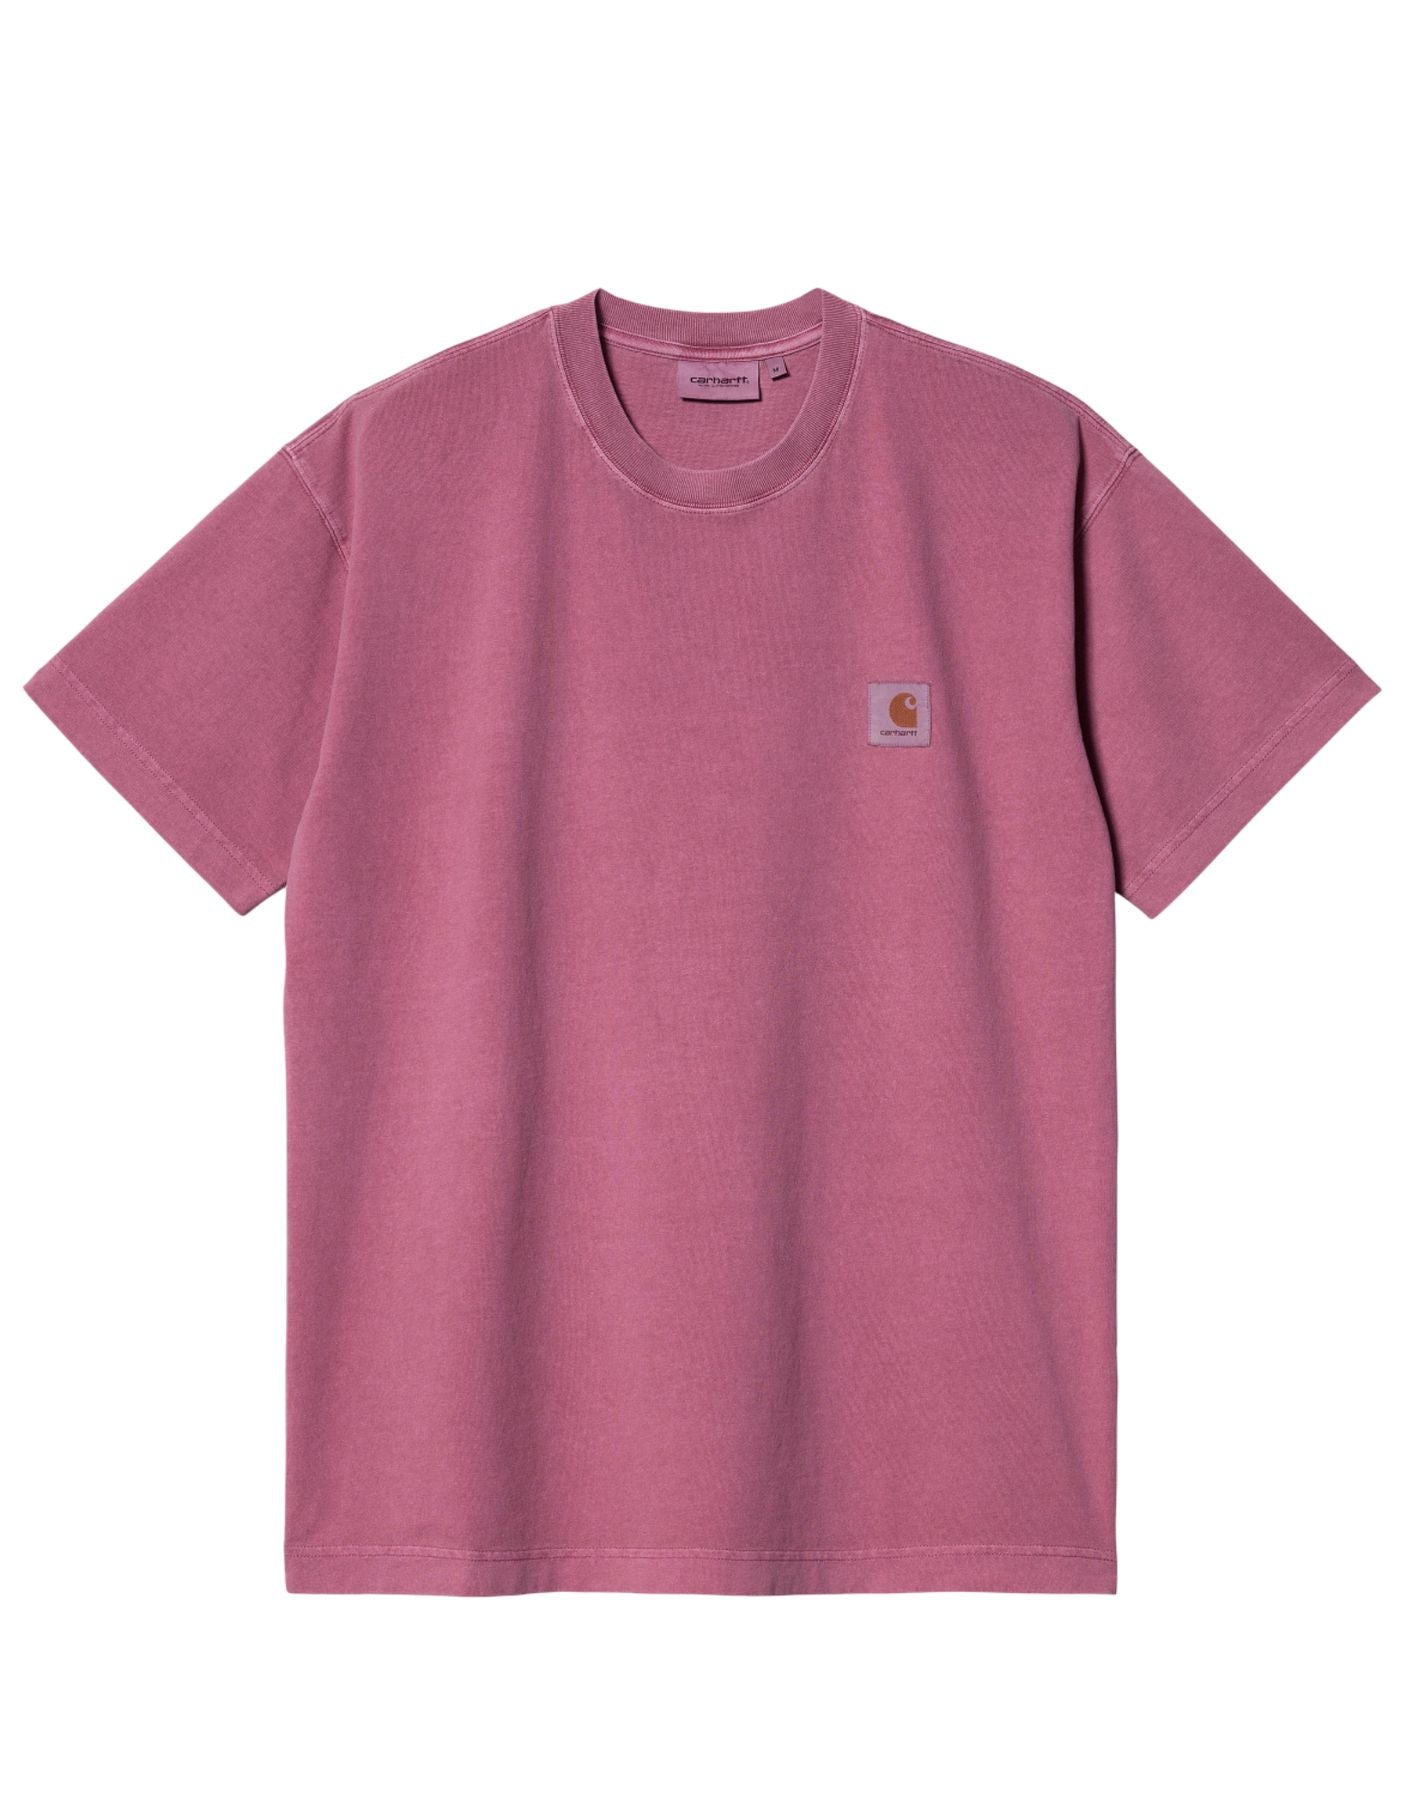 T-shirt pour homme I029949 1YT.GD pink CARHARTT WIP